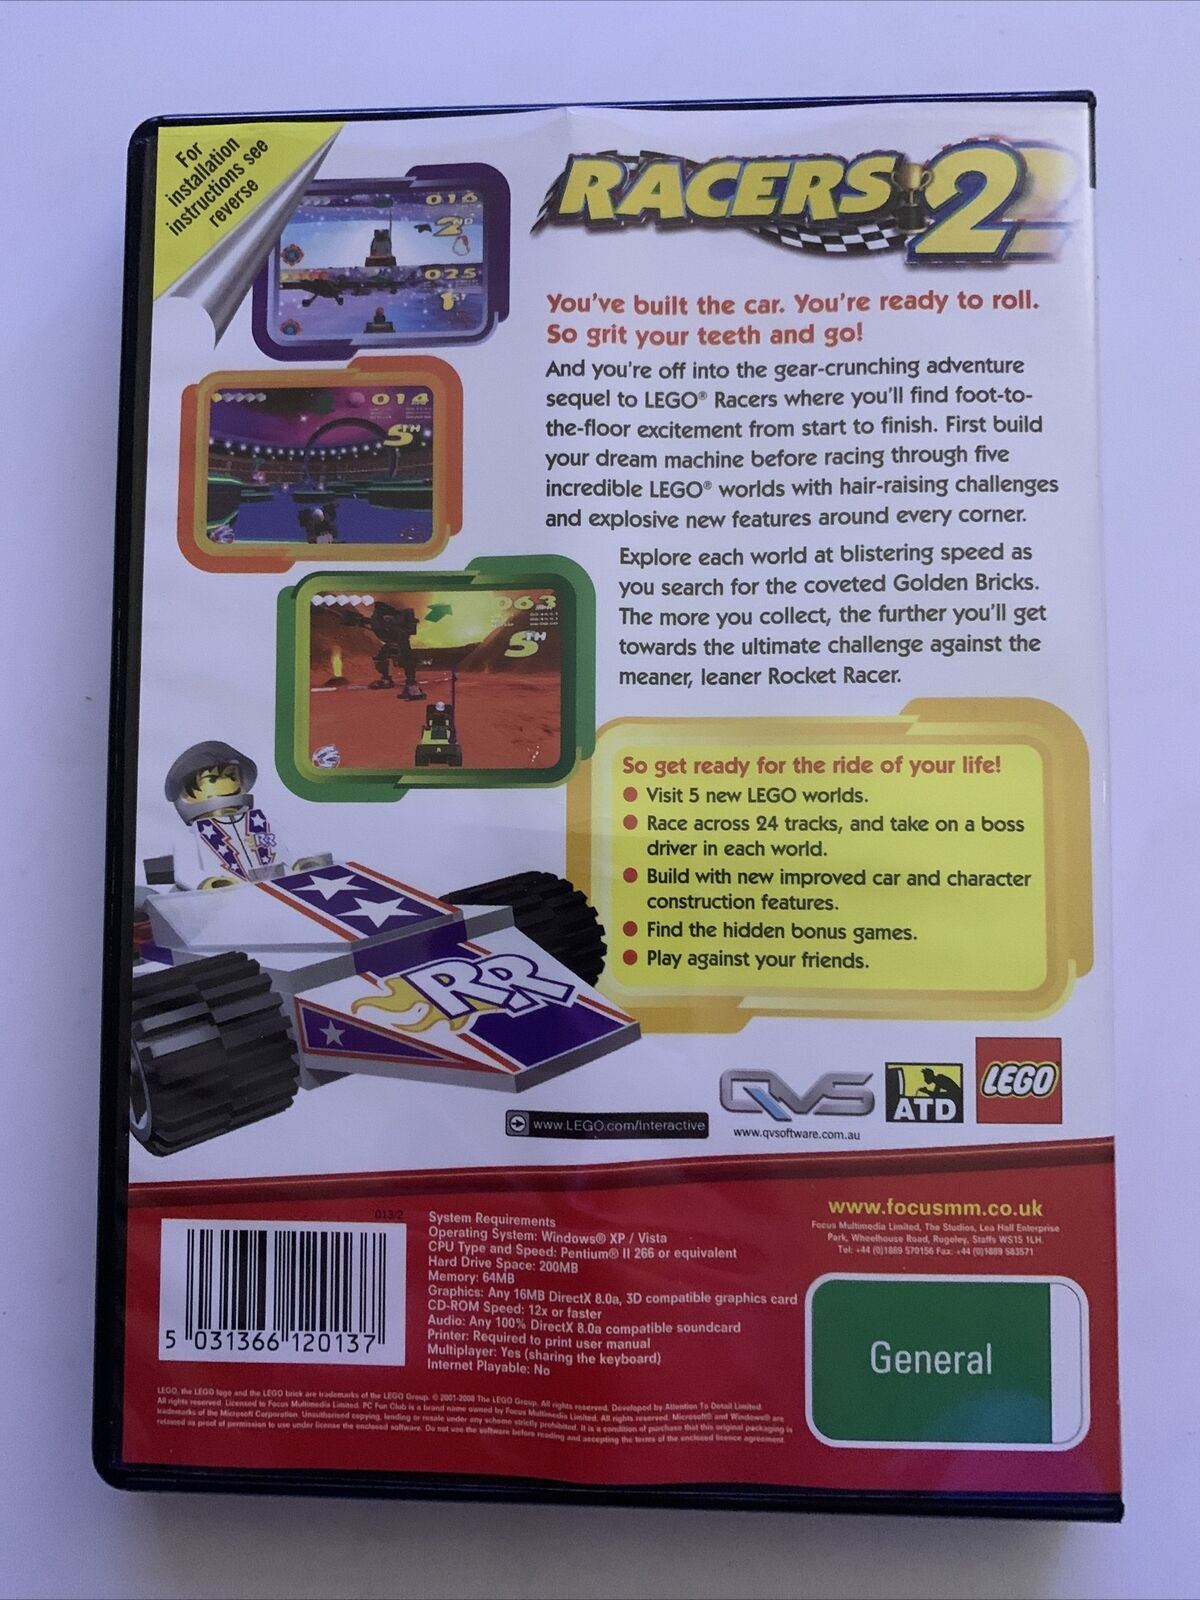 LEGO Racers 2 - PC CD-ROM Game